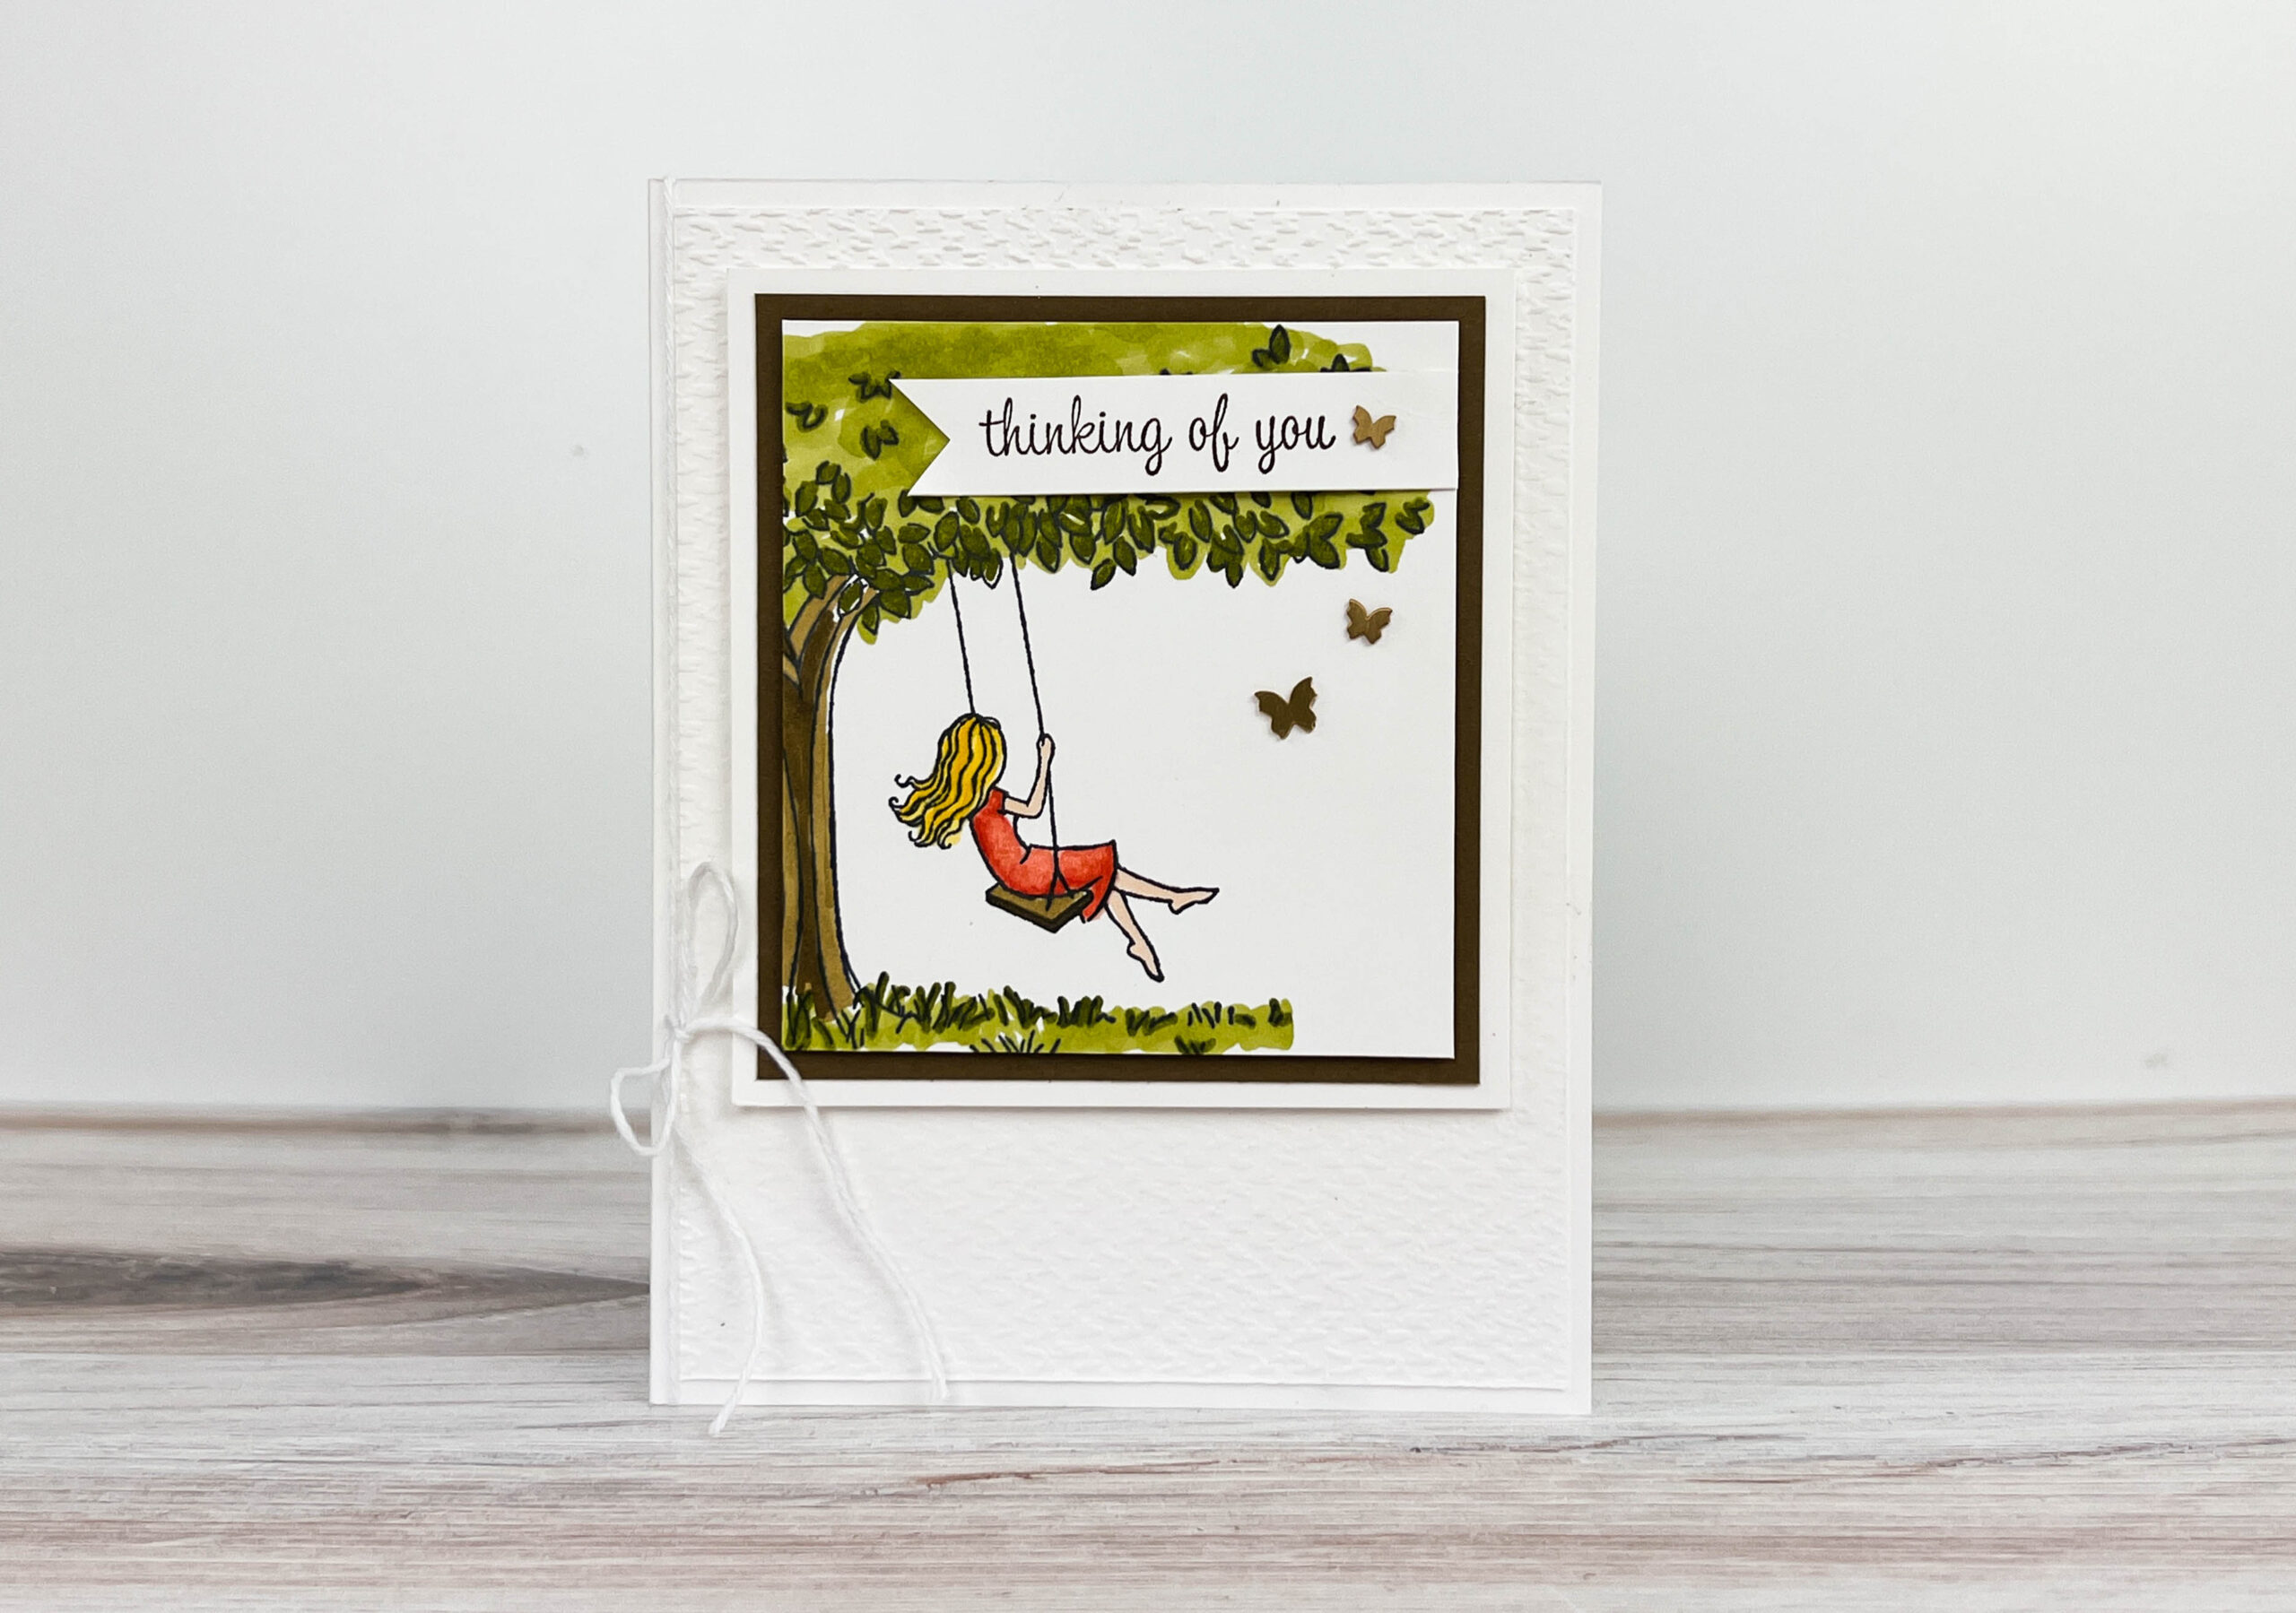 Handmade-thinking-of-you-card-Expressions-of-Friendship-Stampin-Up-card-ideas